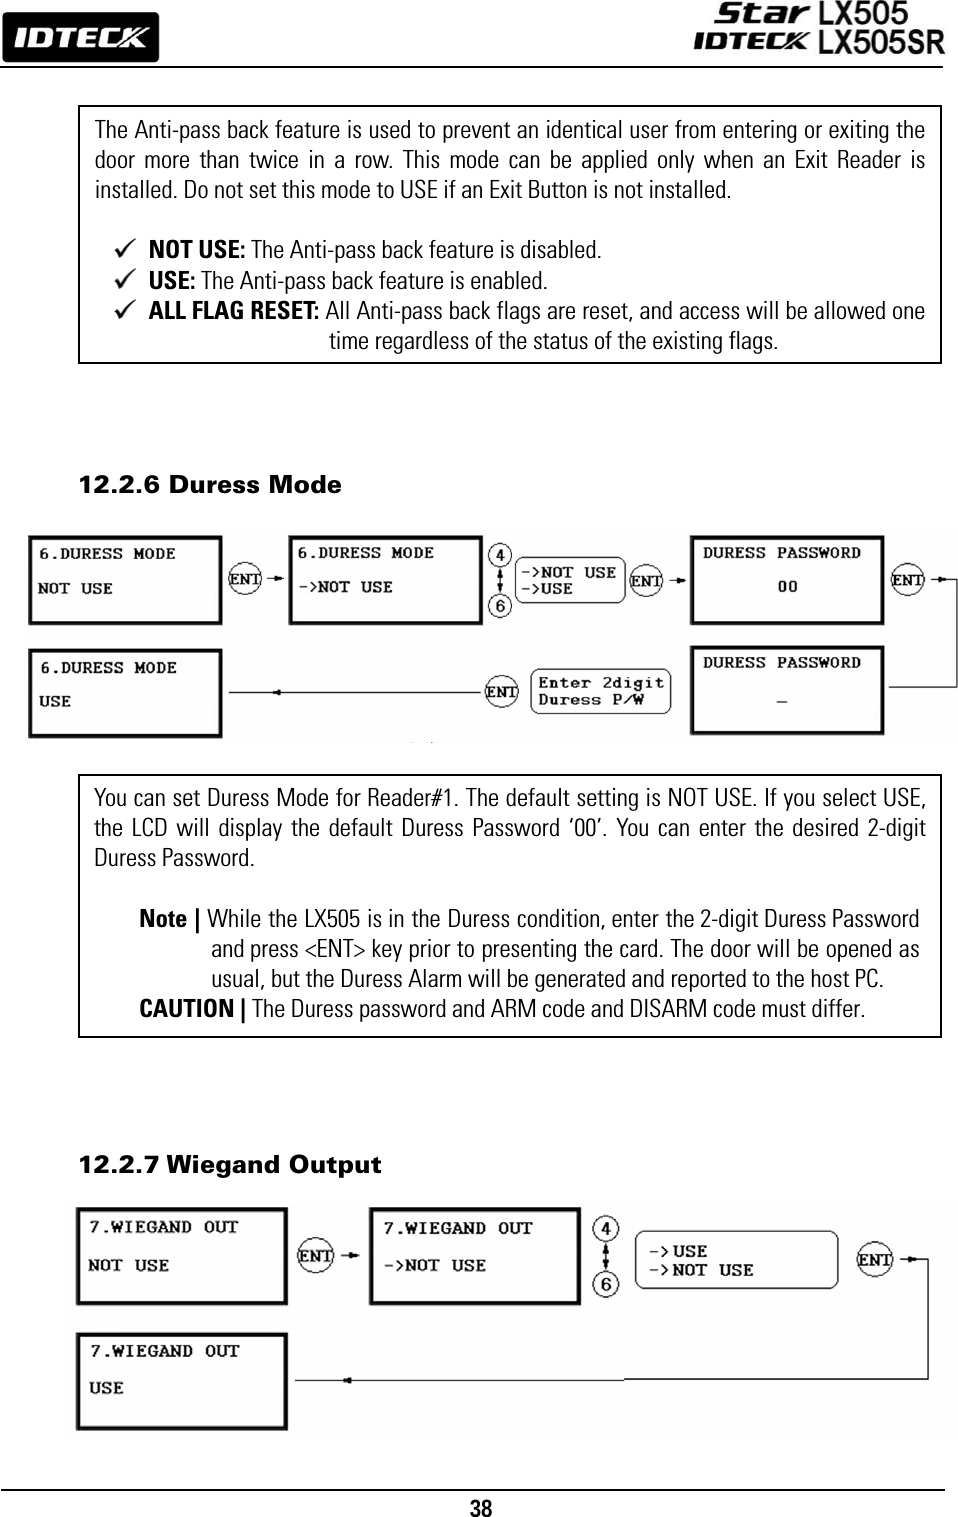                                                                                    38                   12.2.6 Duress Mode                      12.2.7 Wiegand Output          You can set Duress Mode for Reader#1. The default setting is NOT USE. If you select USE, the LCD will display the default Duress Password ‘00’. You can enter the desired 2-digit Duress Password.  Note | While the LX505 is in the Duress condition, enter the 2-digit Duress Password and press &lt;ENT&gt; key prior to presenting the card. The door will be opened as usual, but the Duress Alarm will be generated and reported to the host PC. CAUTION | The Duress password and ARM code and DISARM code must differ. The Anti-pass back feature is used to prevent an identical user from entering or exiting the door more than twice in a row. This mode can be applied only when an Exit Reader is installed. Do not set this mode to USE if an Exit Button is not installed.     NOT USE: The Anti-pass back feature is disabled.  USE: The Anti-pass back feature is enabled.  ALL FLAG RESET: All Anti-pass back flags are reset, and access will be allowed one time regardless of the status of the existing flags. 